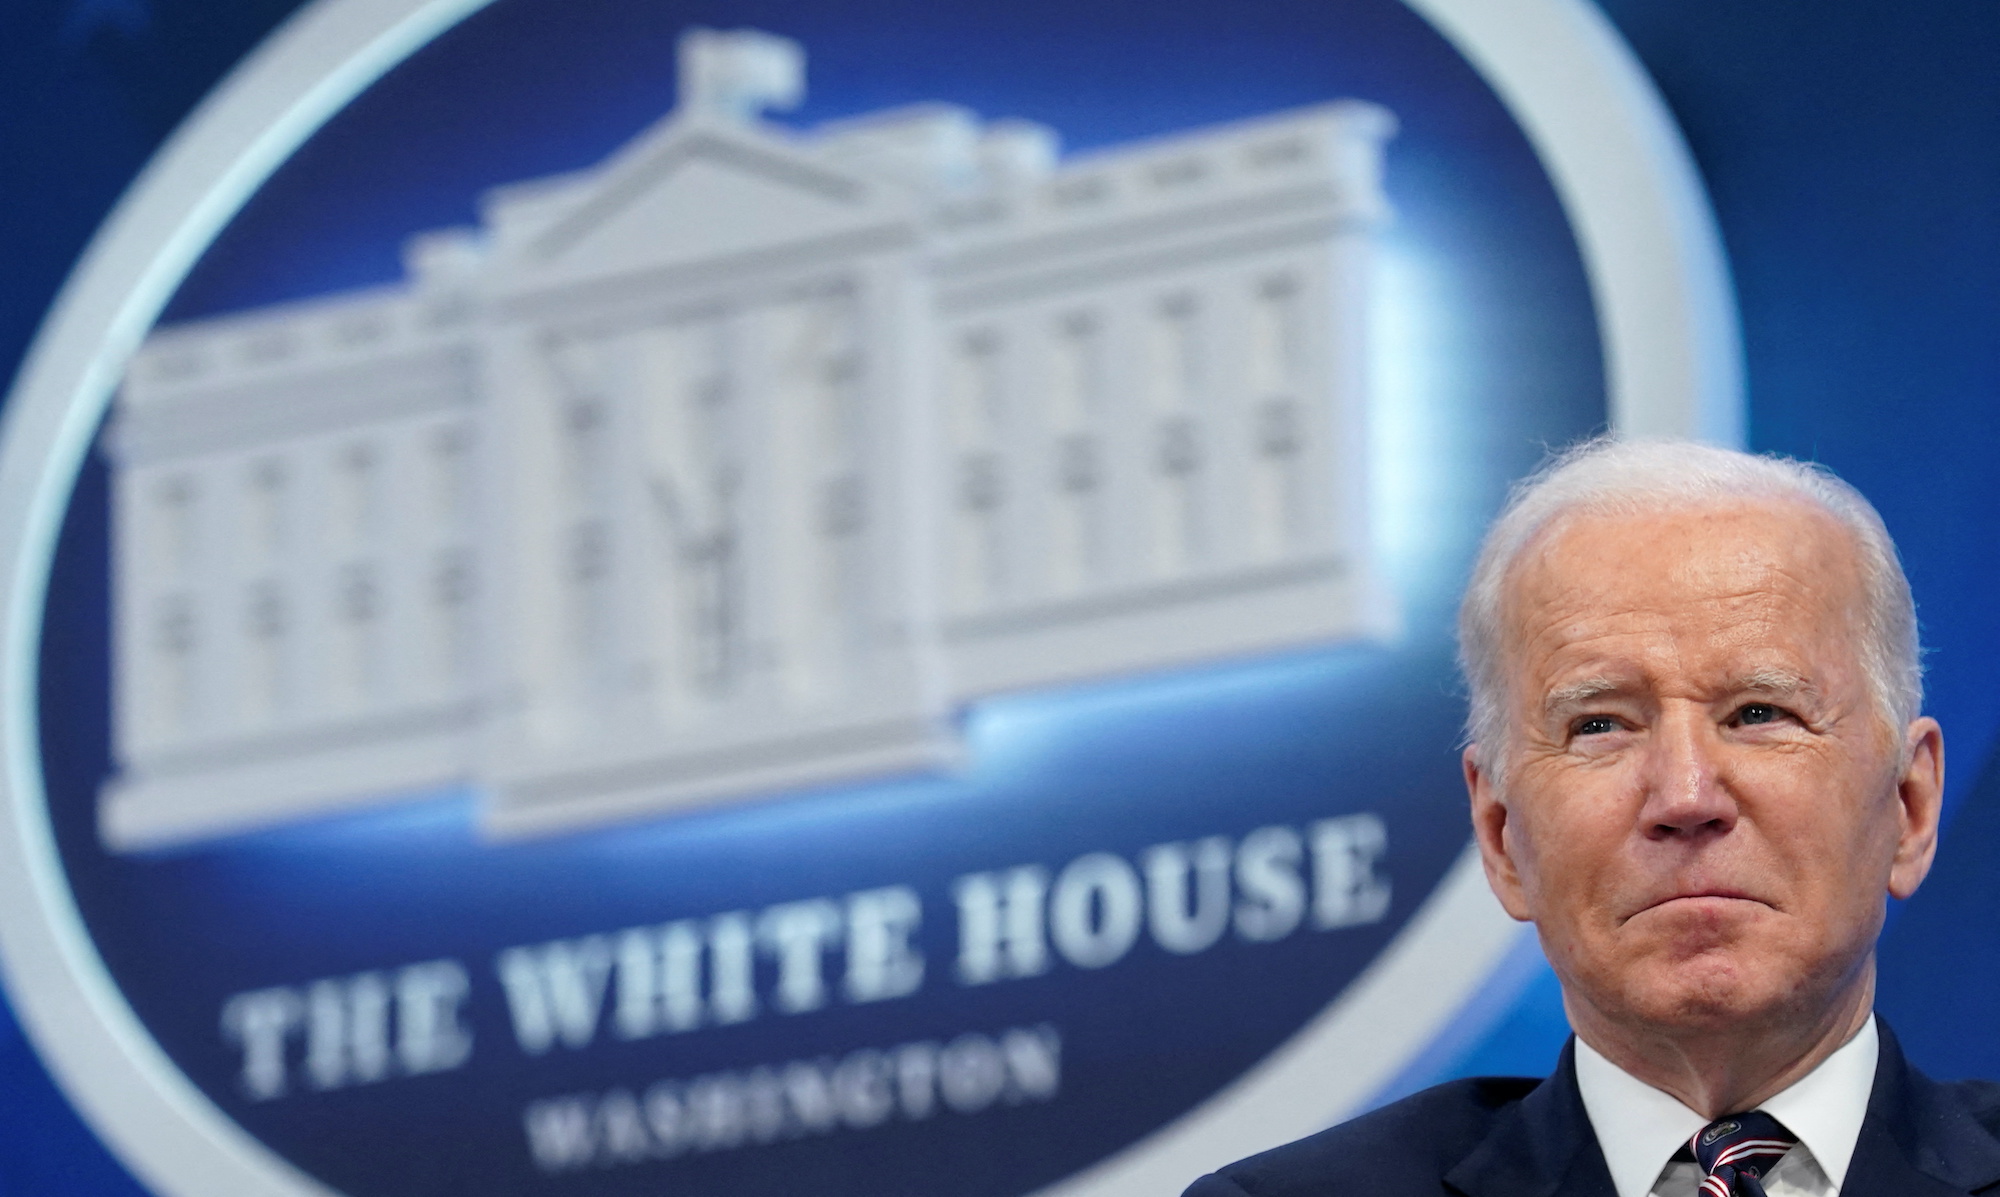 Biden Takes on Container Shipping Despite No Evidence of Wrongdoing